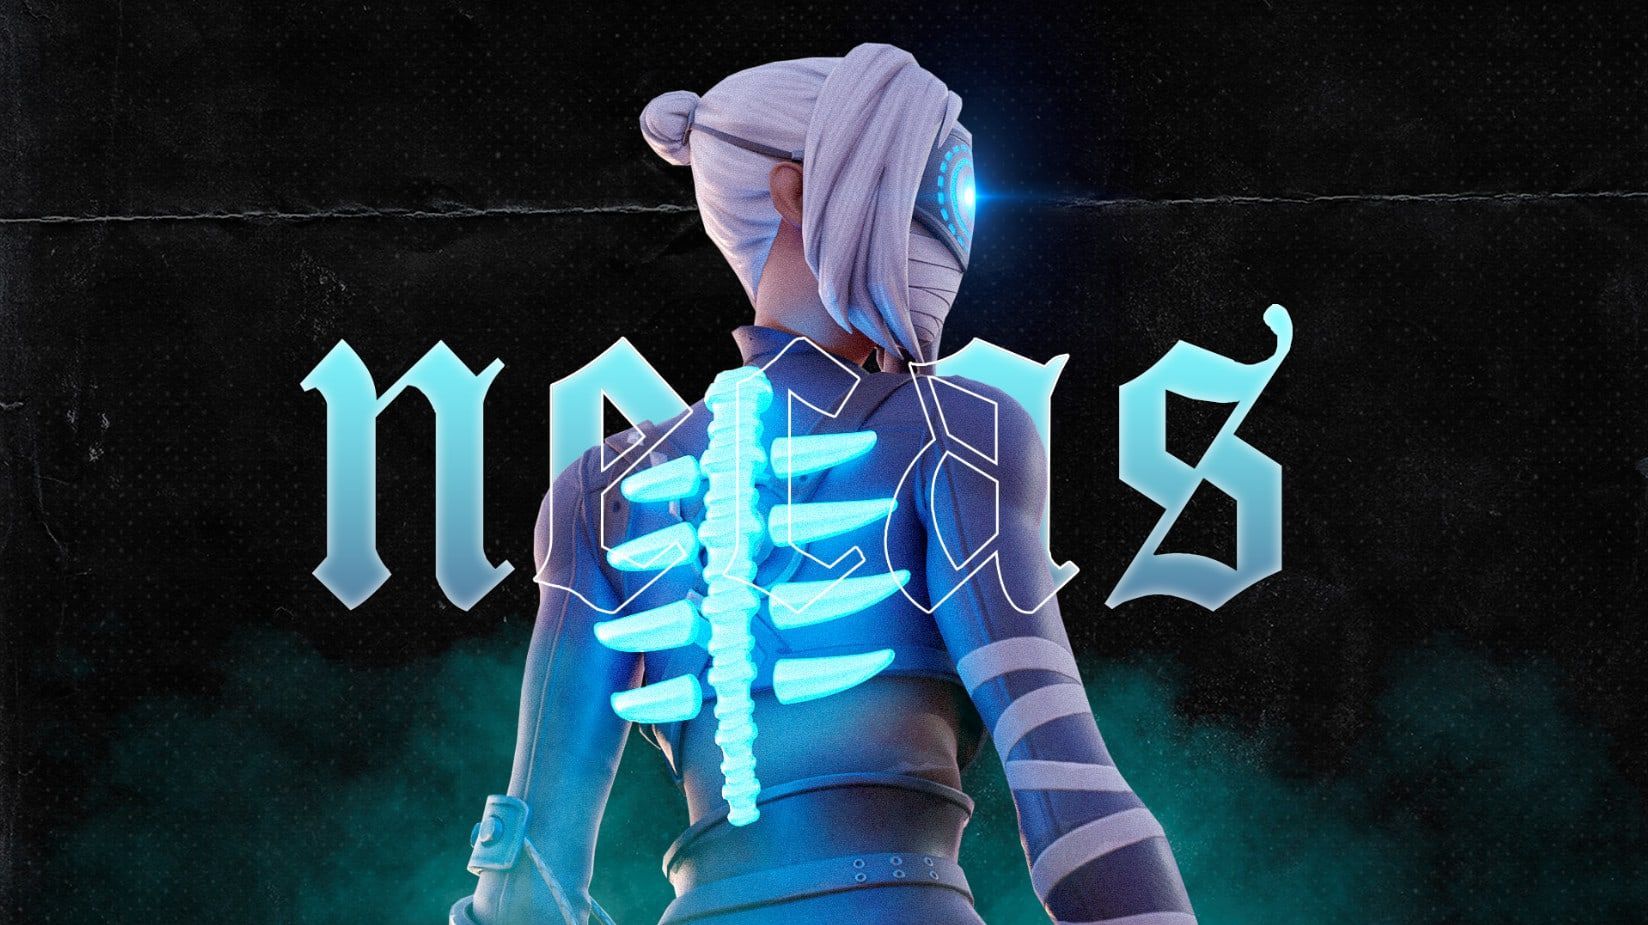 A Fortnite character with glowing blue bones on their back stands in front of the word 'Nemesis'. - Fortnite